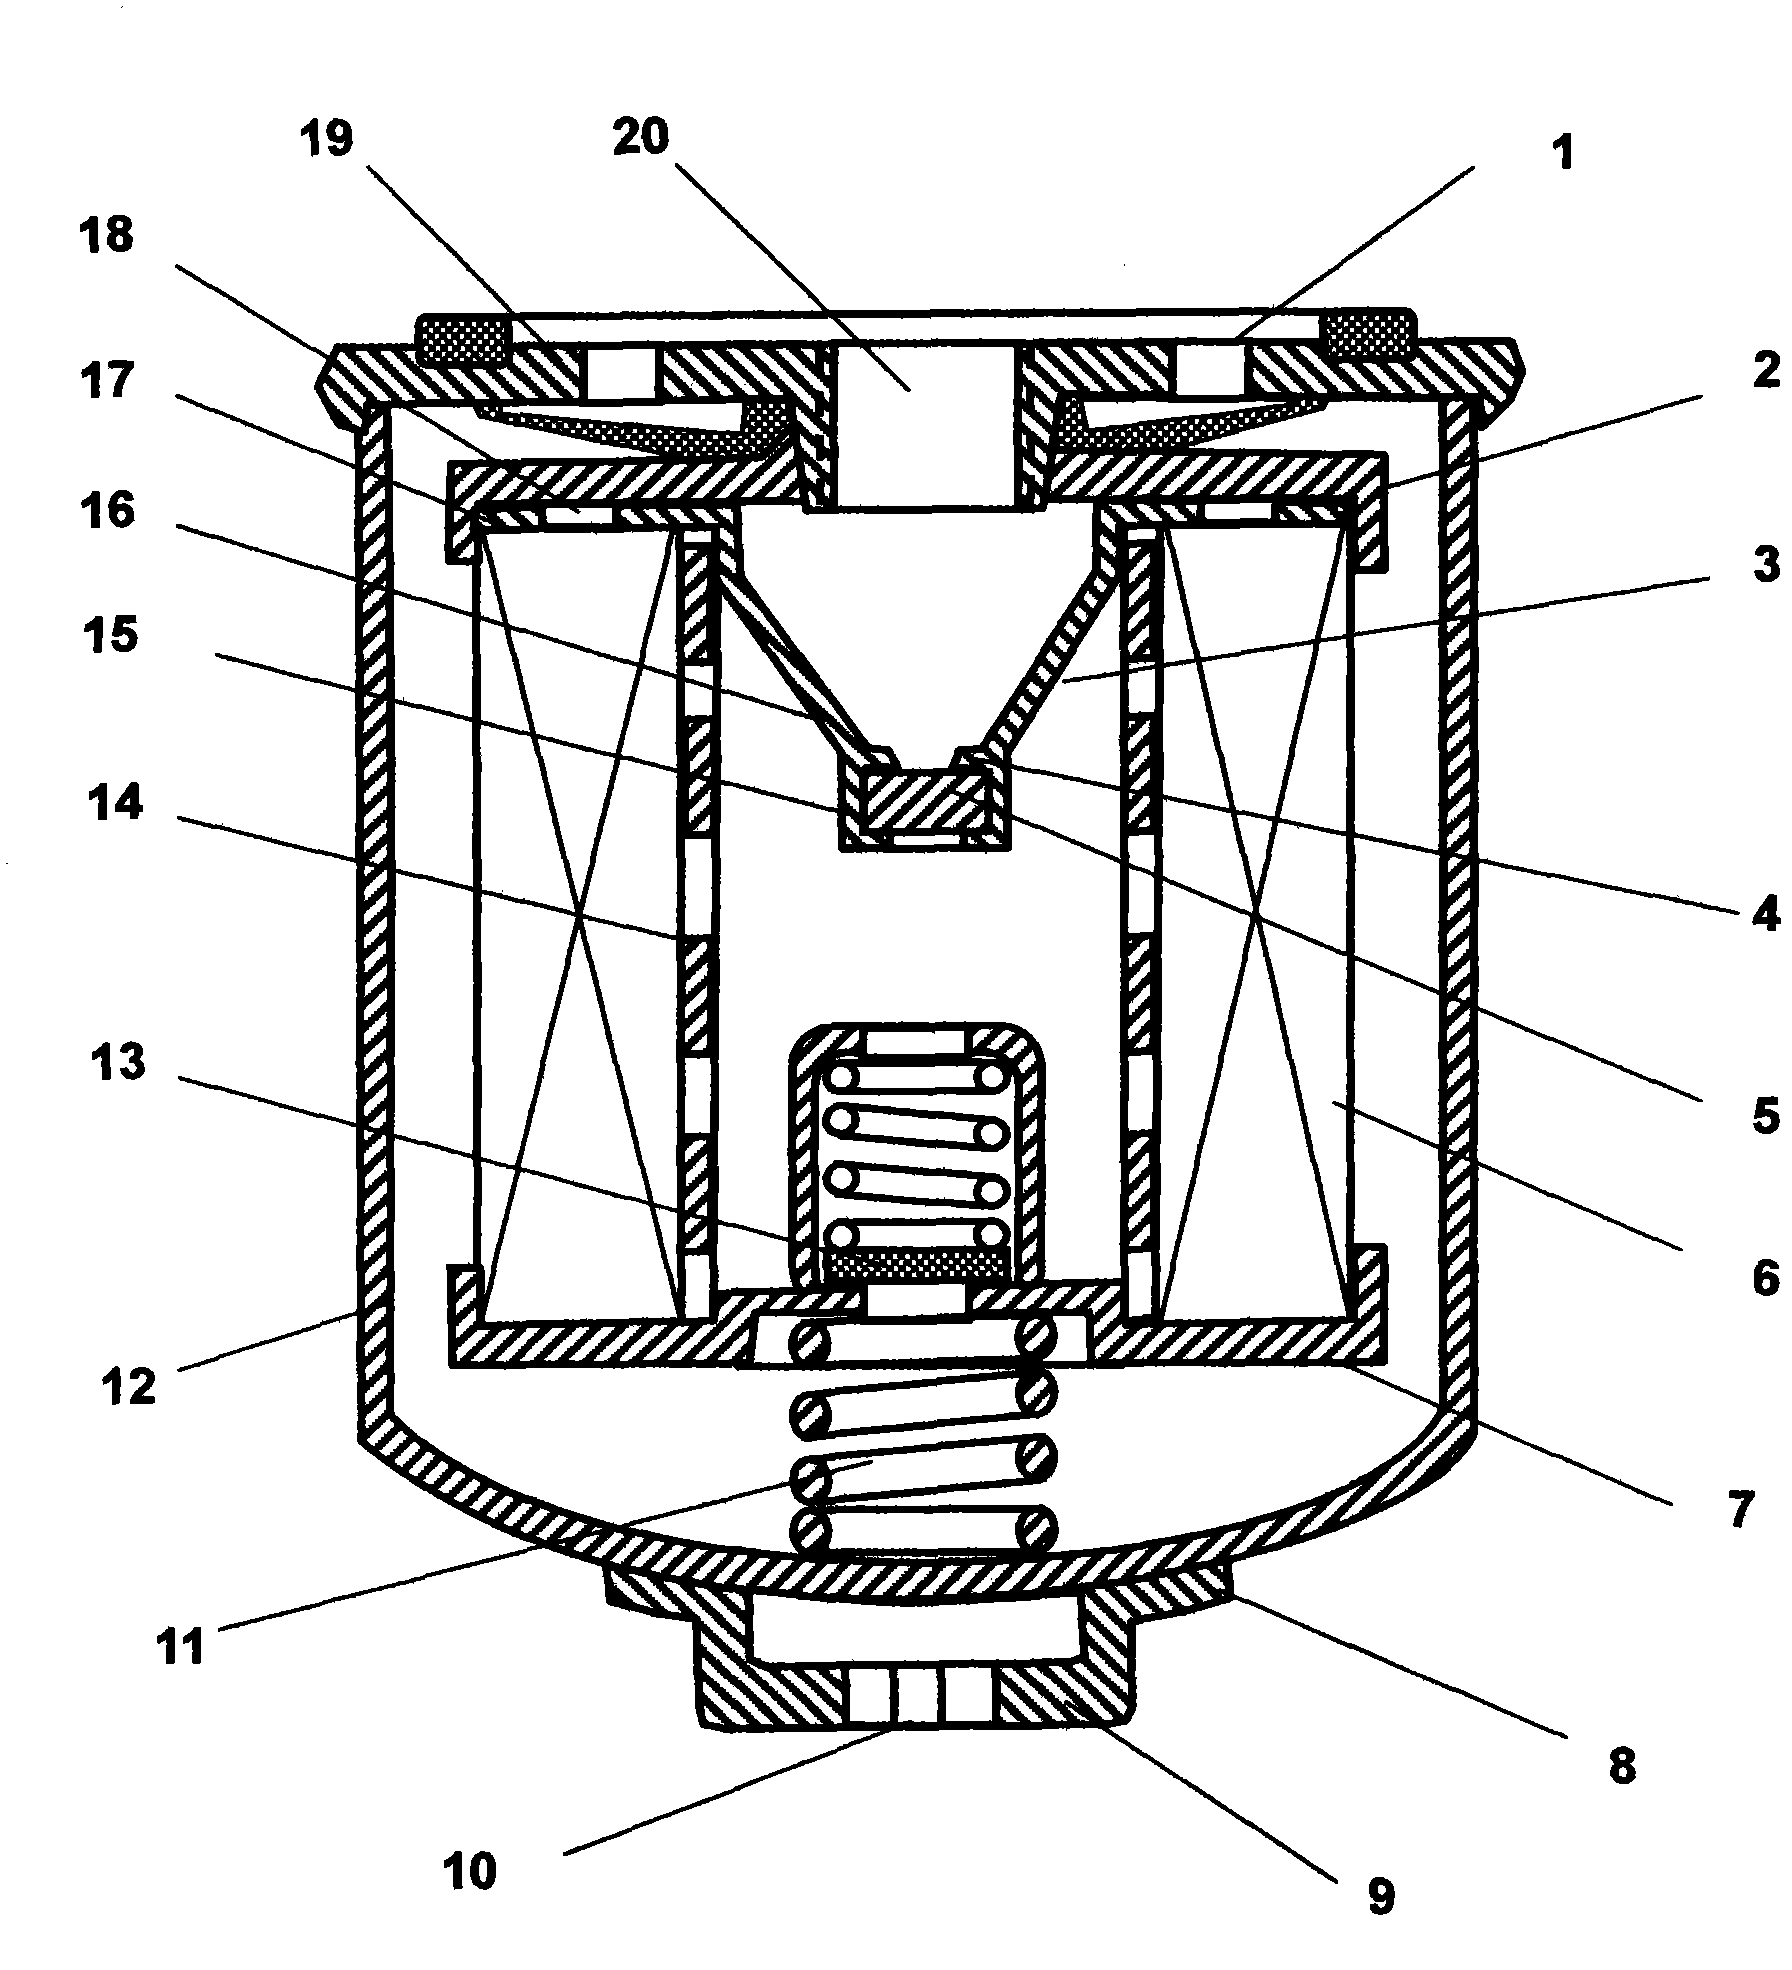 Fluid high-intensity magnetic integrated filter